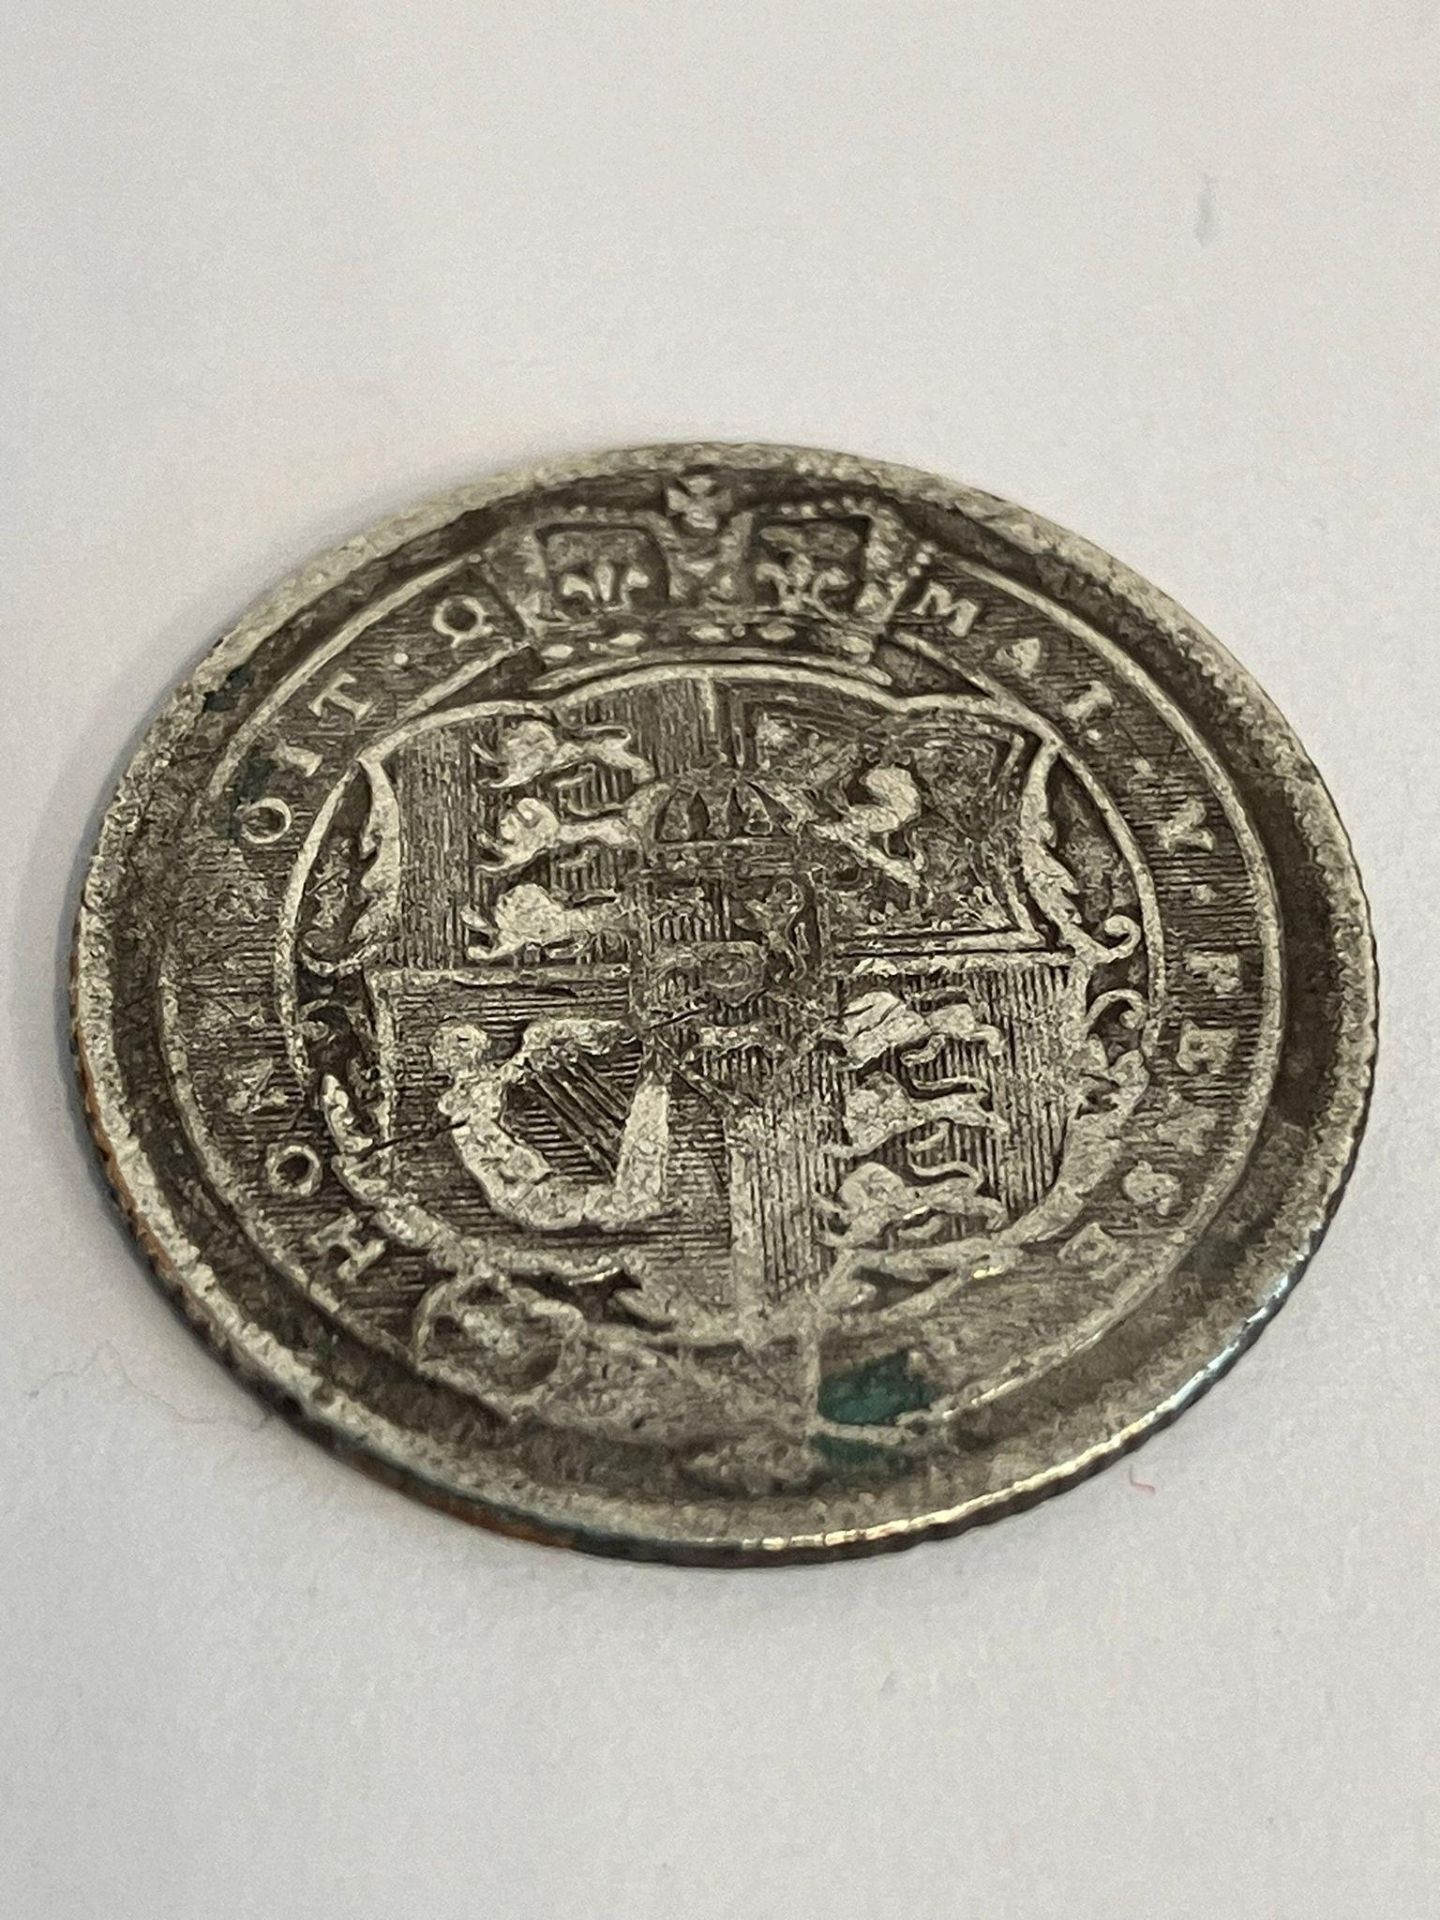 1818 GEORGE III SILVER SIXPENCE. condition fine/very fine, could use a clean. - Bild 3 aus 3